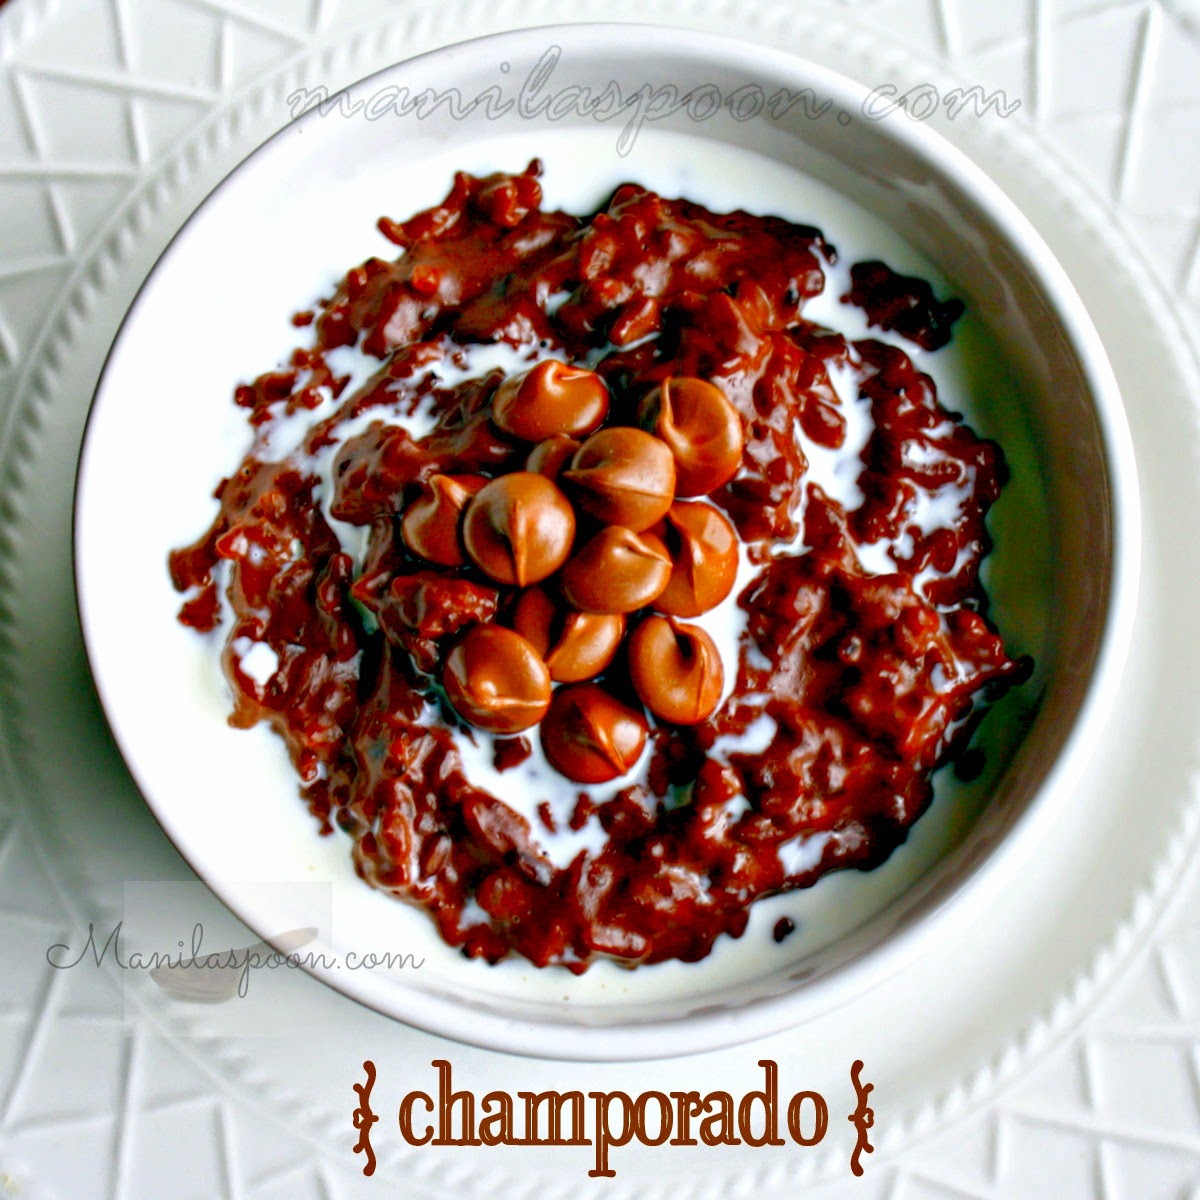 Sticky rice cooked in coconut milk and chocolate. The ultimate breakfast sweet treat or serve with ice cream and it's a yummy dessert - Champorado!